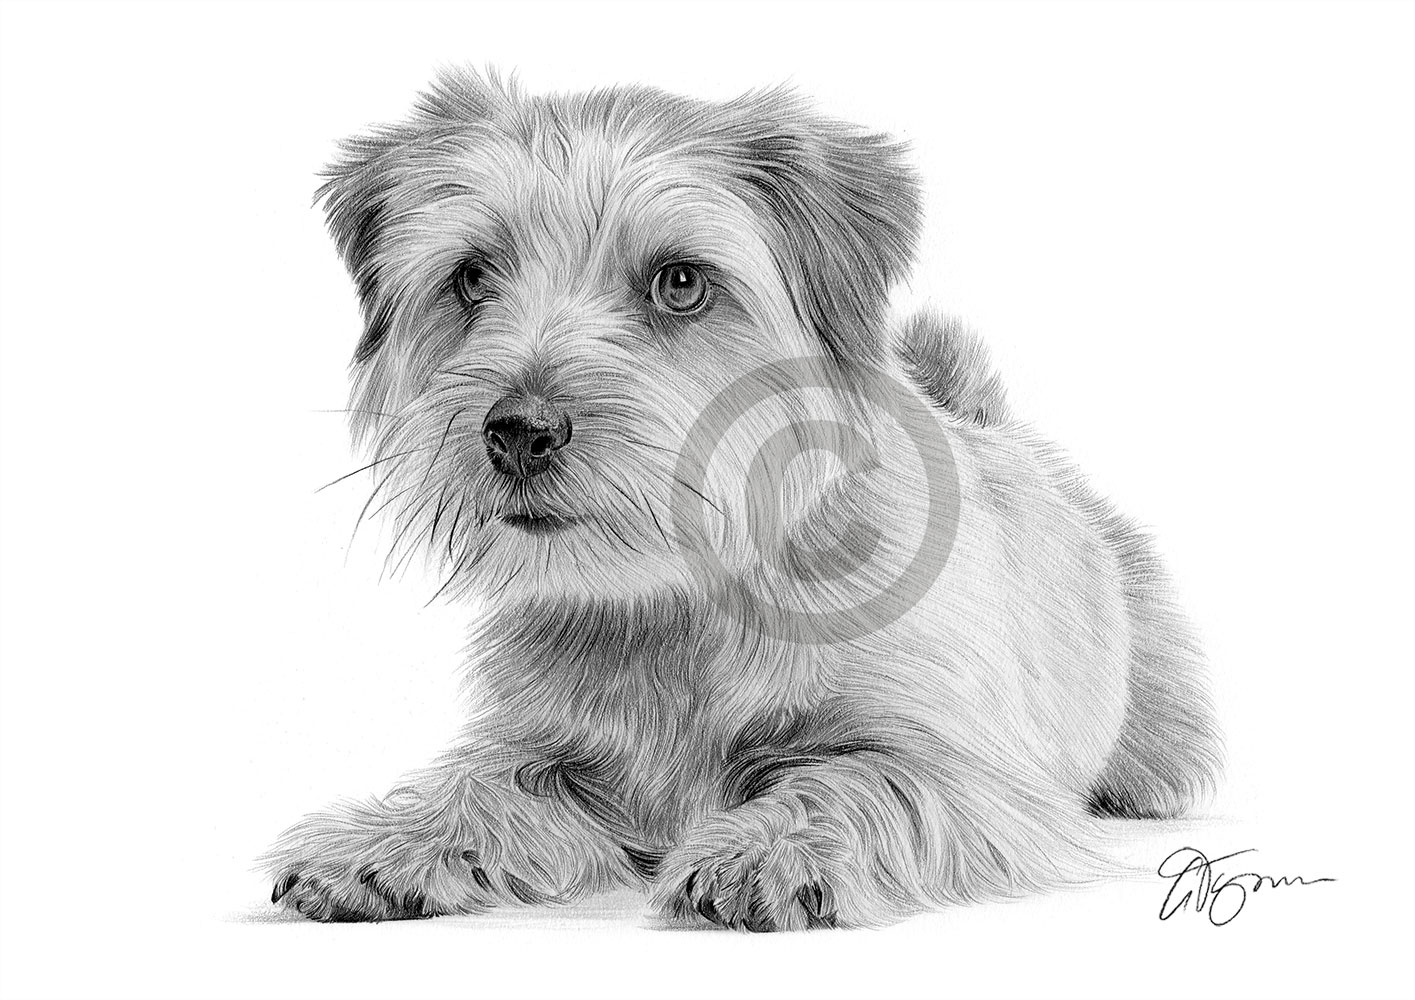 Pencil drawing of a Norfolk terrier by artist Gary Tymon